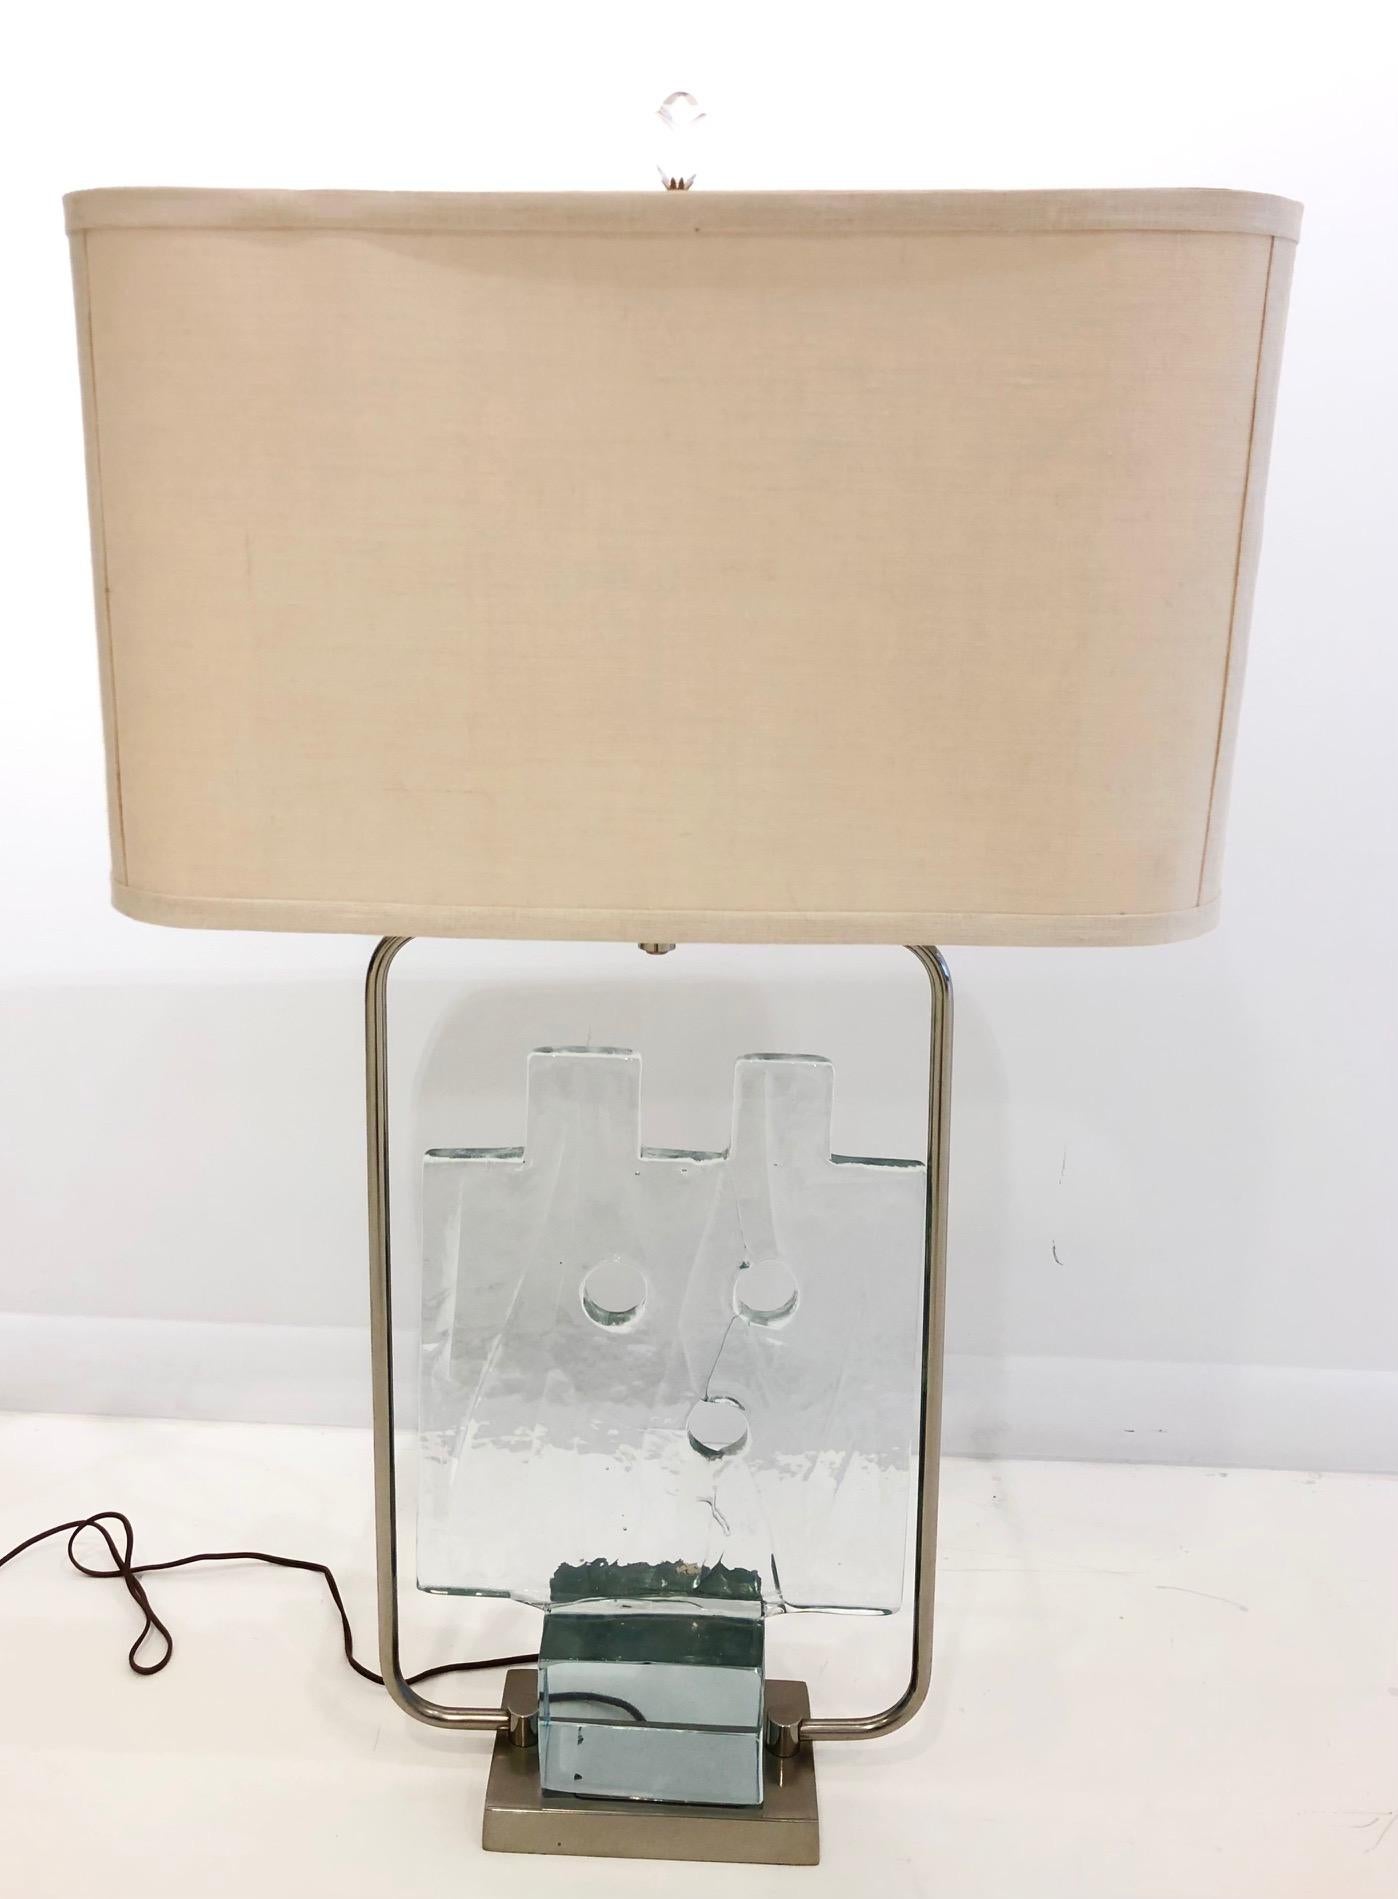 c. 1960, Italy, the cast clear glass modernist Spazialismo work is the largest of three sizes, and weights approx. 20lbs. It was produced by murano glass maker Salviati, where Gaspari was design director from 1955-1968. The work sits freely on a